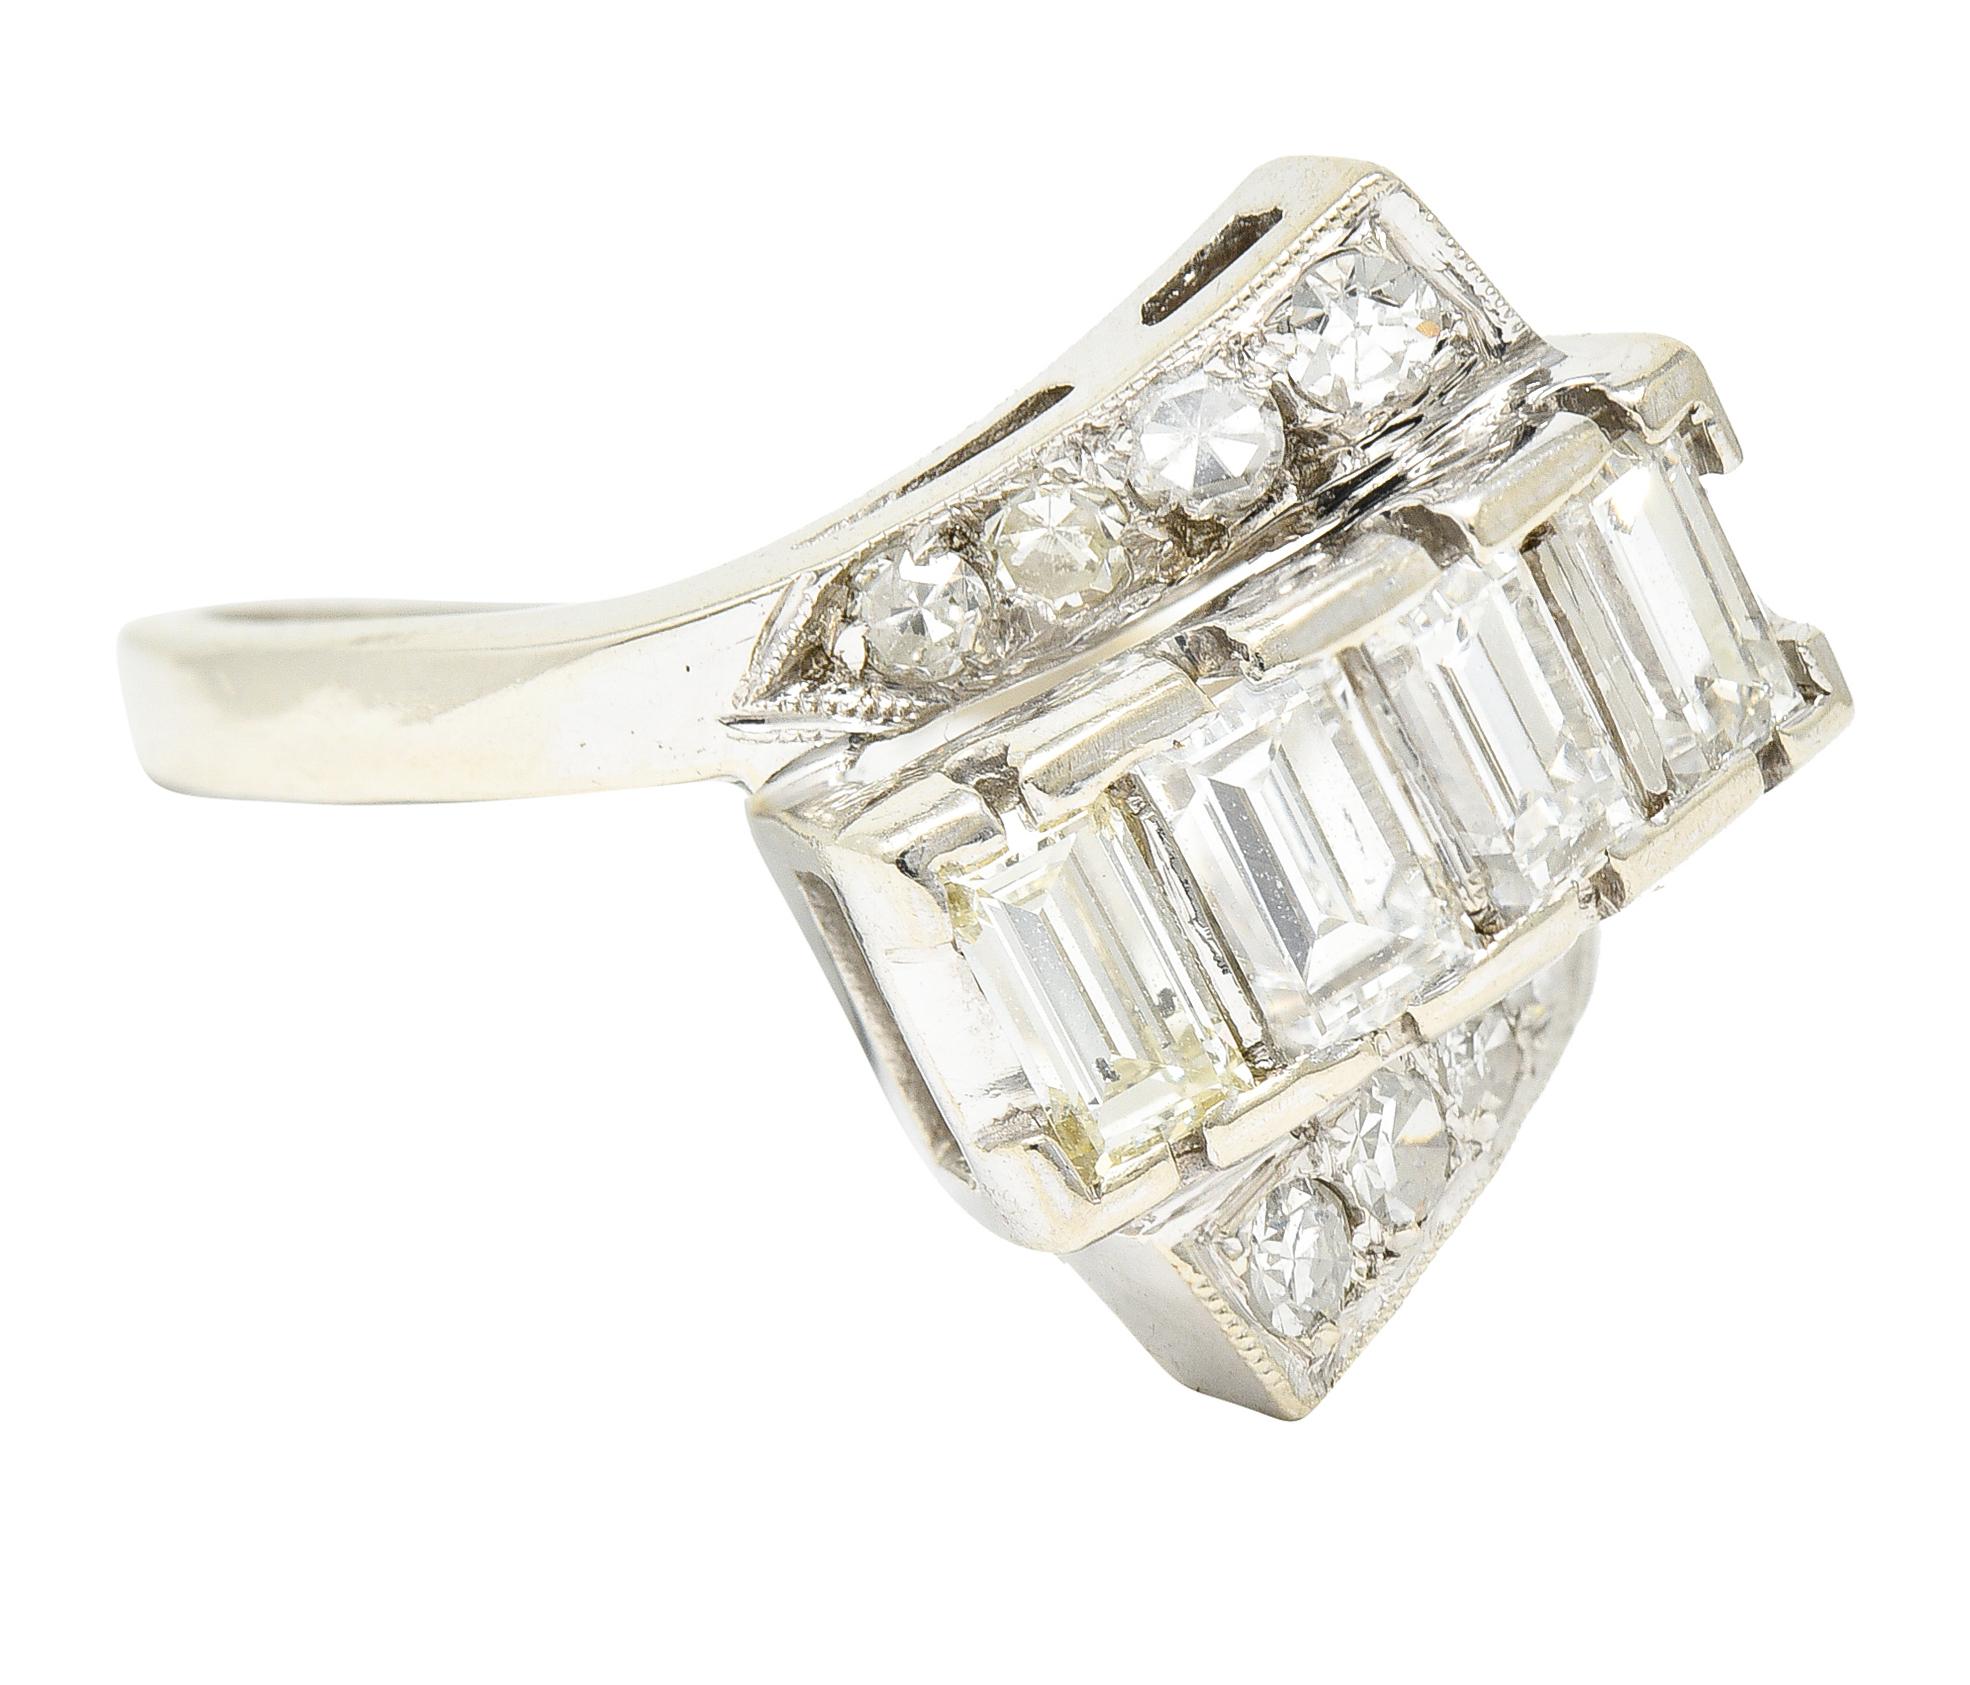 Bypass ring centers a row of straight baguette cu diamonds. Weighing collectively approximately 0.80 carat - G/H color with VS1 clarity. Rectangular form is ori. nted at an angle and flanked by ribbon like shoulders. Accented by single cut diamonds